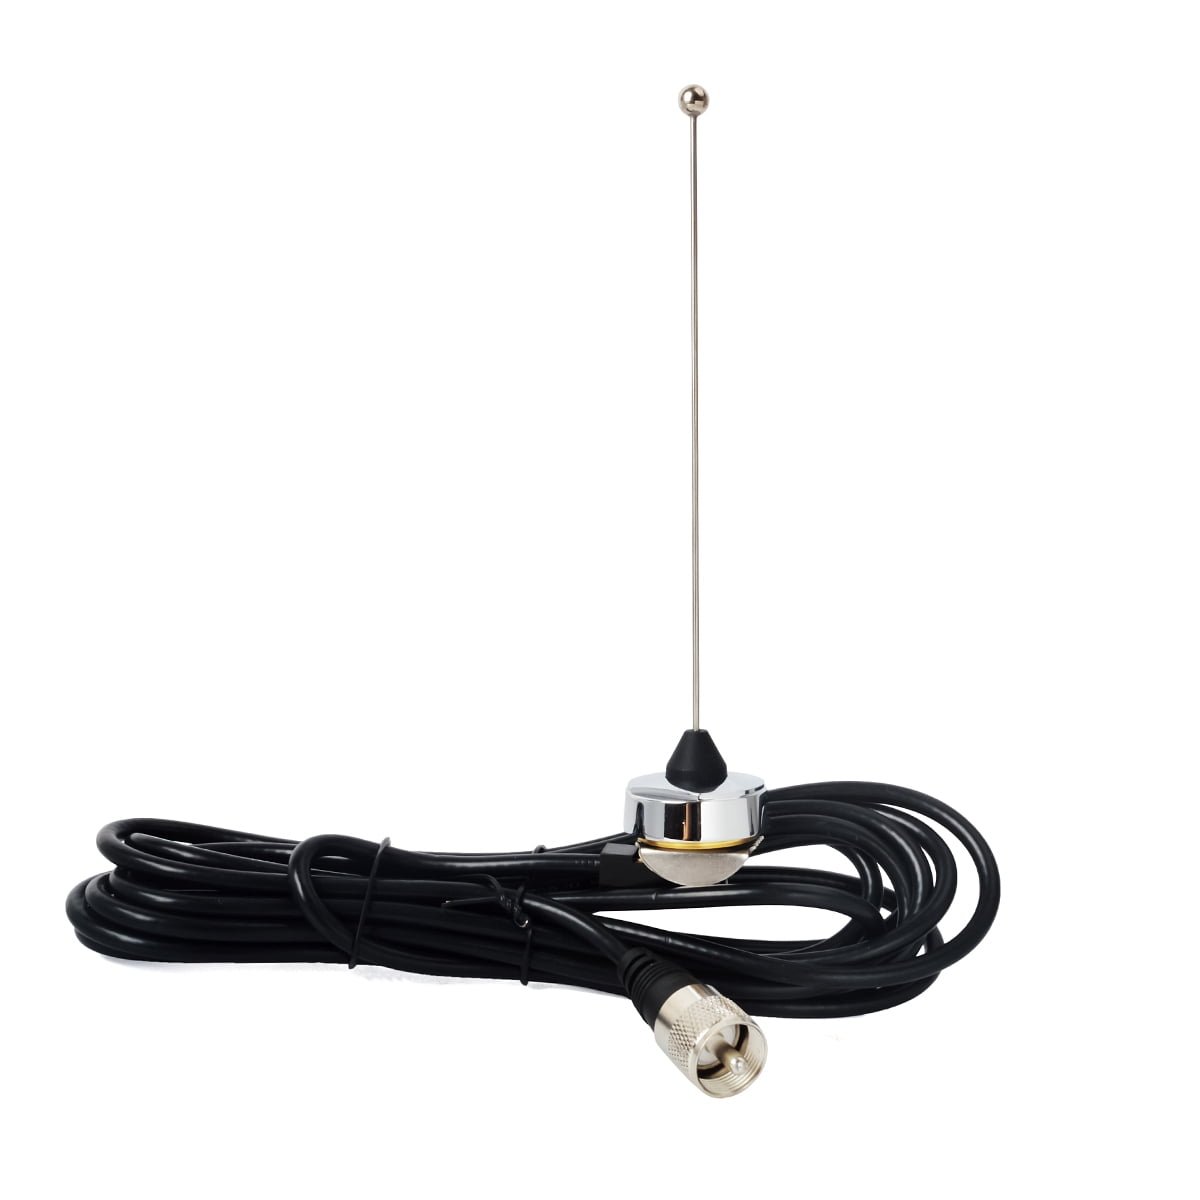 2M NMO VHF Trunk Antenna+Mount NMO PL259 connector and 13Ft of RG-58 Coax Cable 